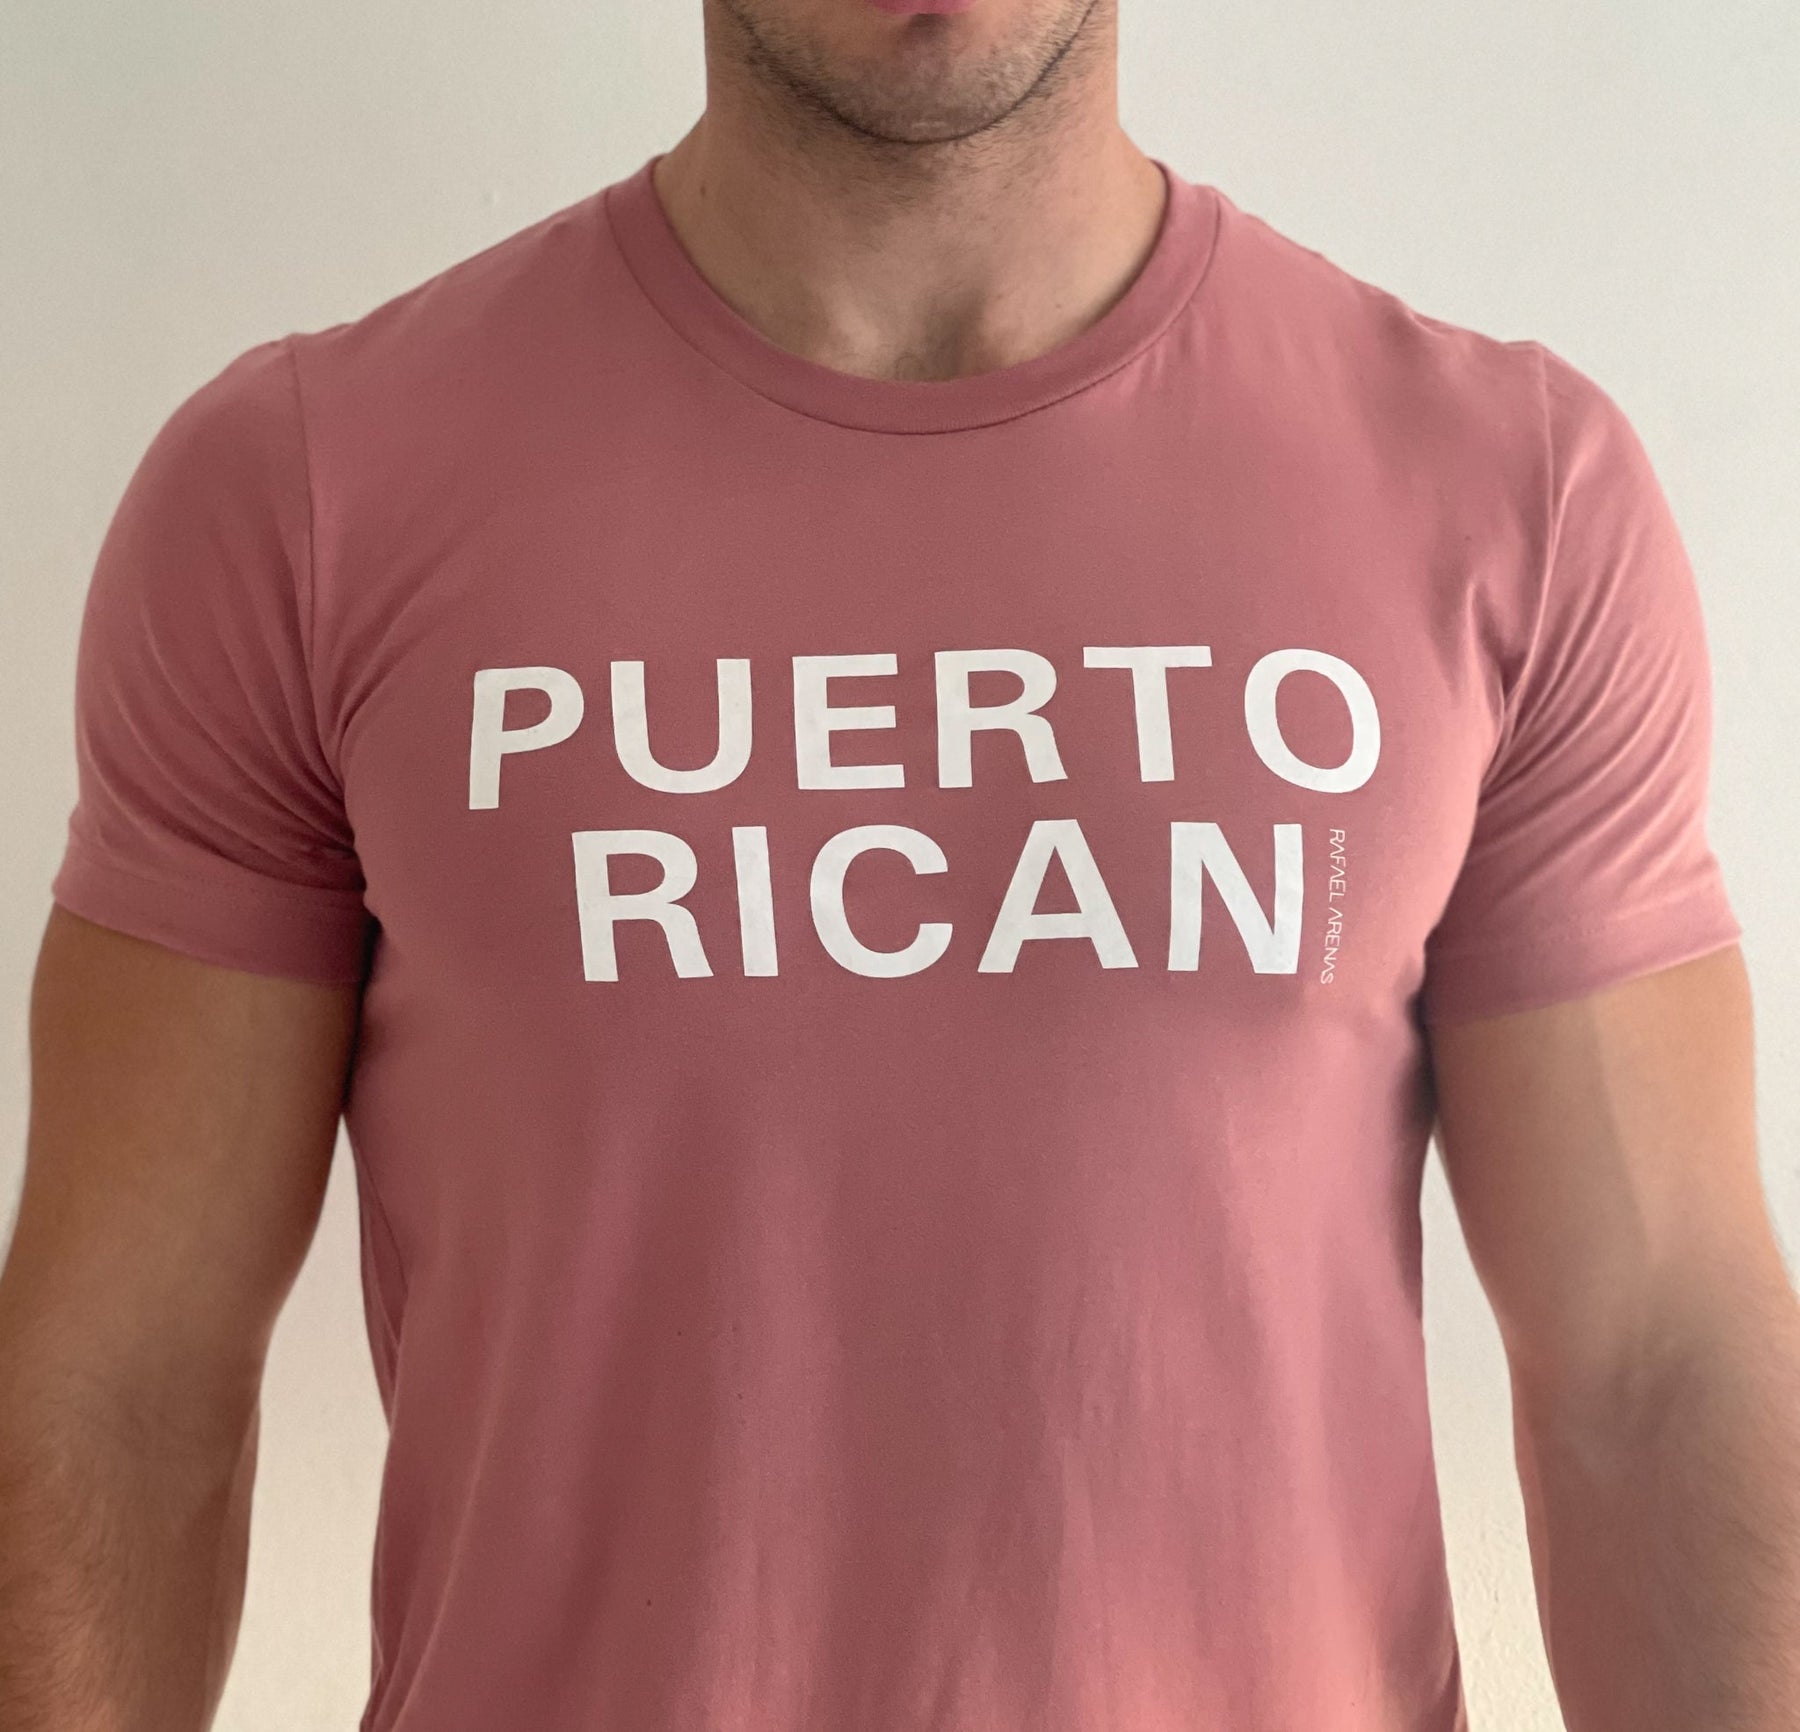 PUERTO RICAN (FRONT) - GUAVA-PINK T Shirt